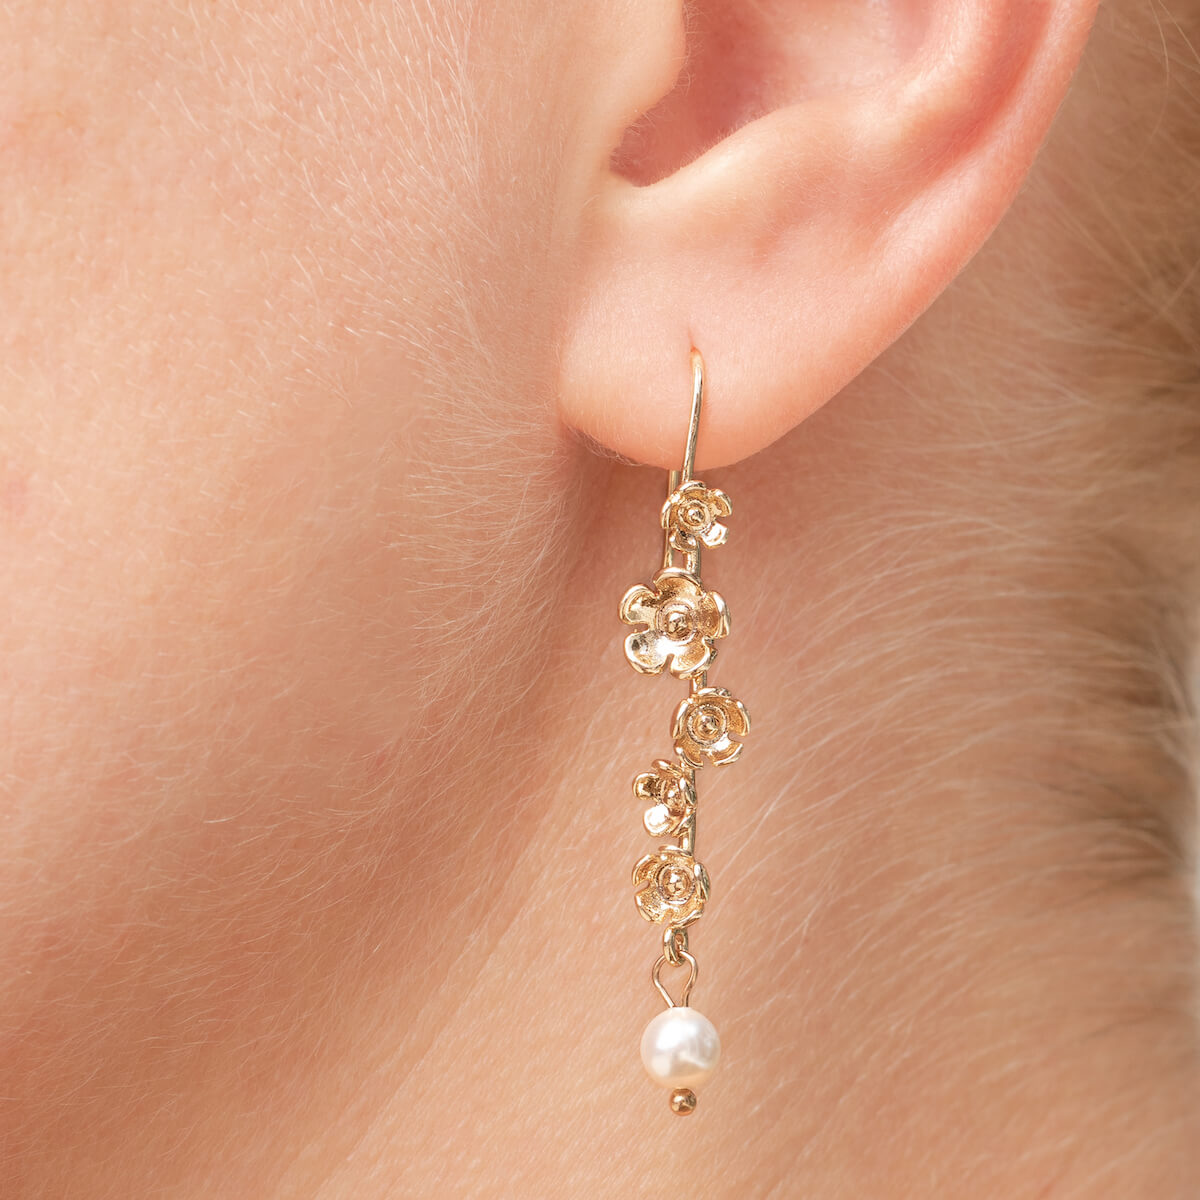 Double hoop stud earrings, 8mm crystal (gold finish only)